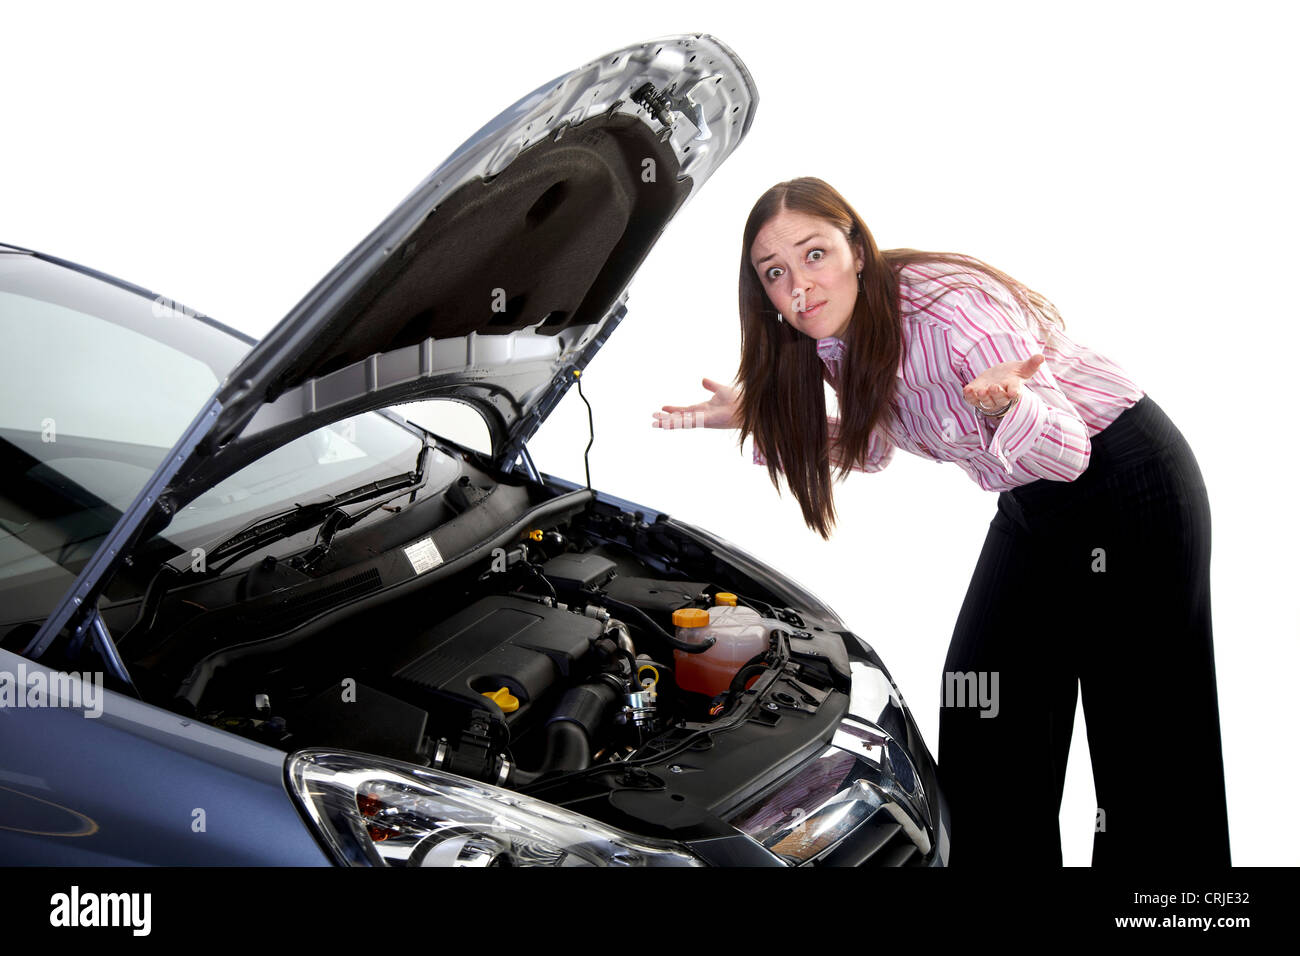 young woman with a capitulating gesture in front of the open engine bonnet of a car Stock Photo